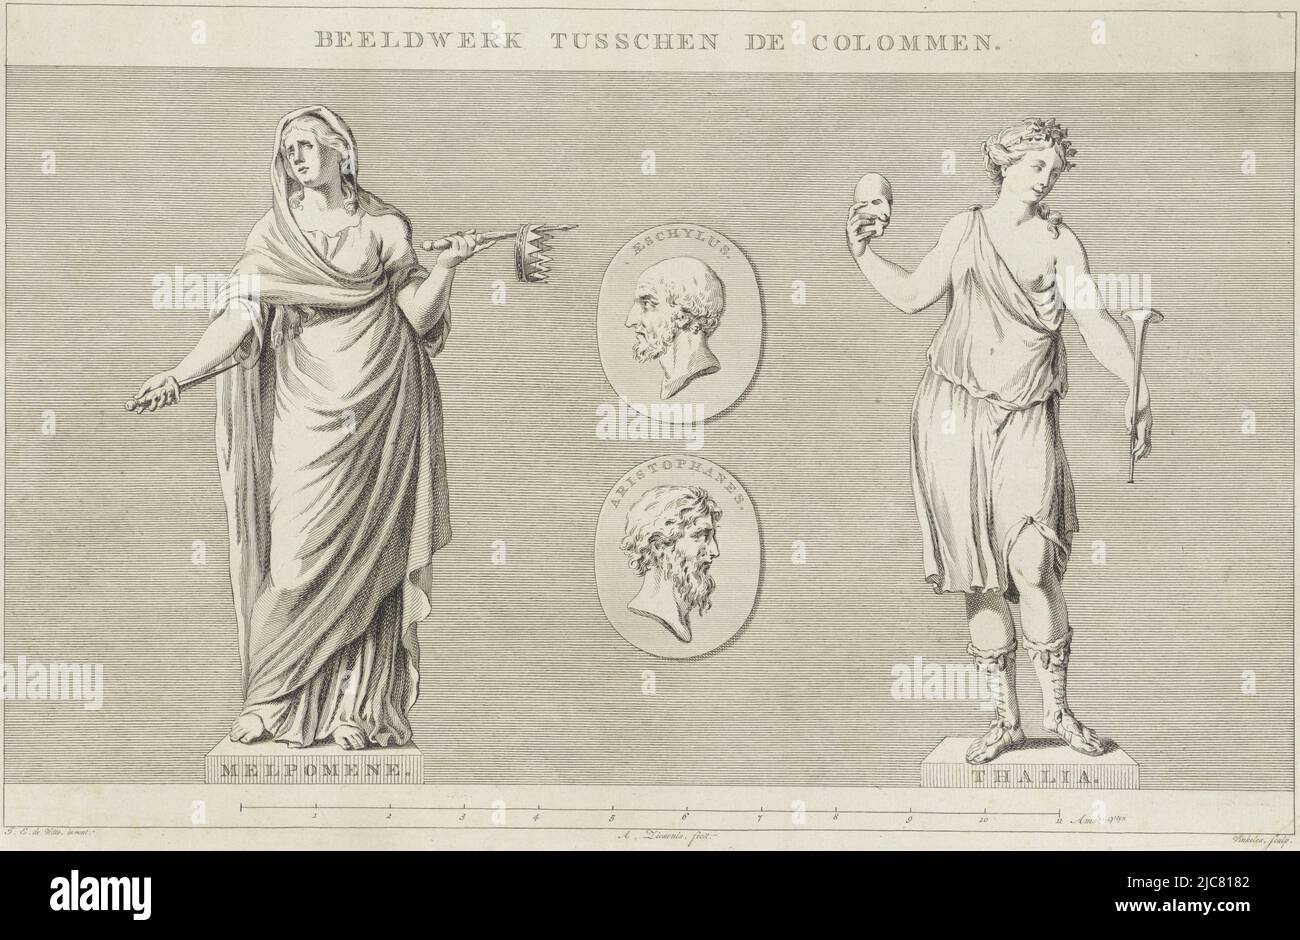 The muse of tragedy Melpomene with dagger, sceptre and crown and the muse of comedy Thalia with mask and trumpet. Between them two medallions depicting the tragedy poet Aeschylus and the comedy poet Aristophanes, Images from the Theatre of Amsterdam Sculpture between the columns , print maker: Reinier Vinkeles (I), (mentioned on object), Jacob Eduard de Witte, (mentioned on object), Amsterdam, 1774, paper, etching, engraving, h 330 mm × w 510 mm Stock Photo